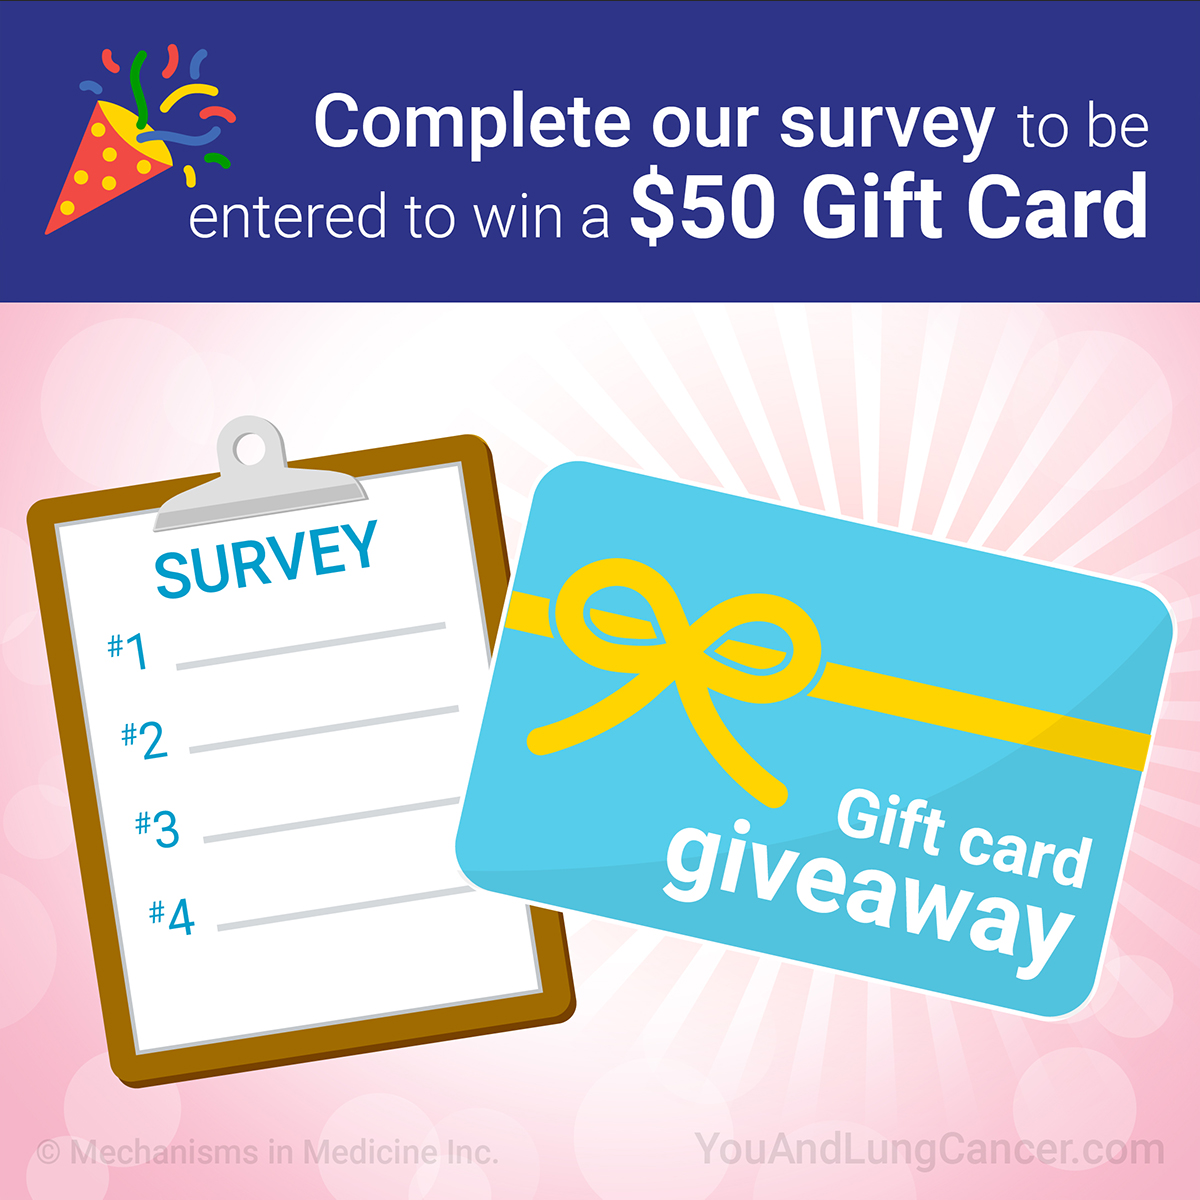 Complete our survey to be entered into a monthly draw to win a $50 Amazon Gift Card!